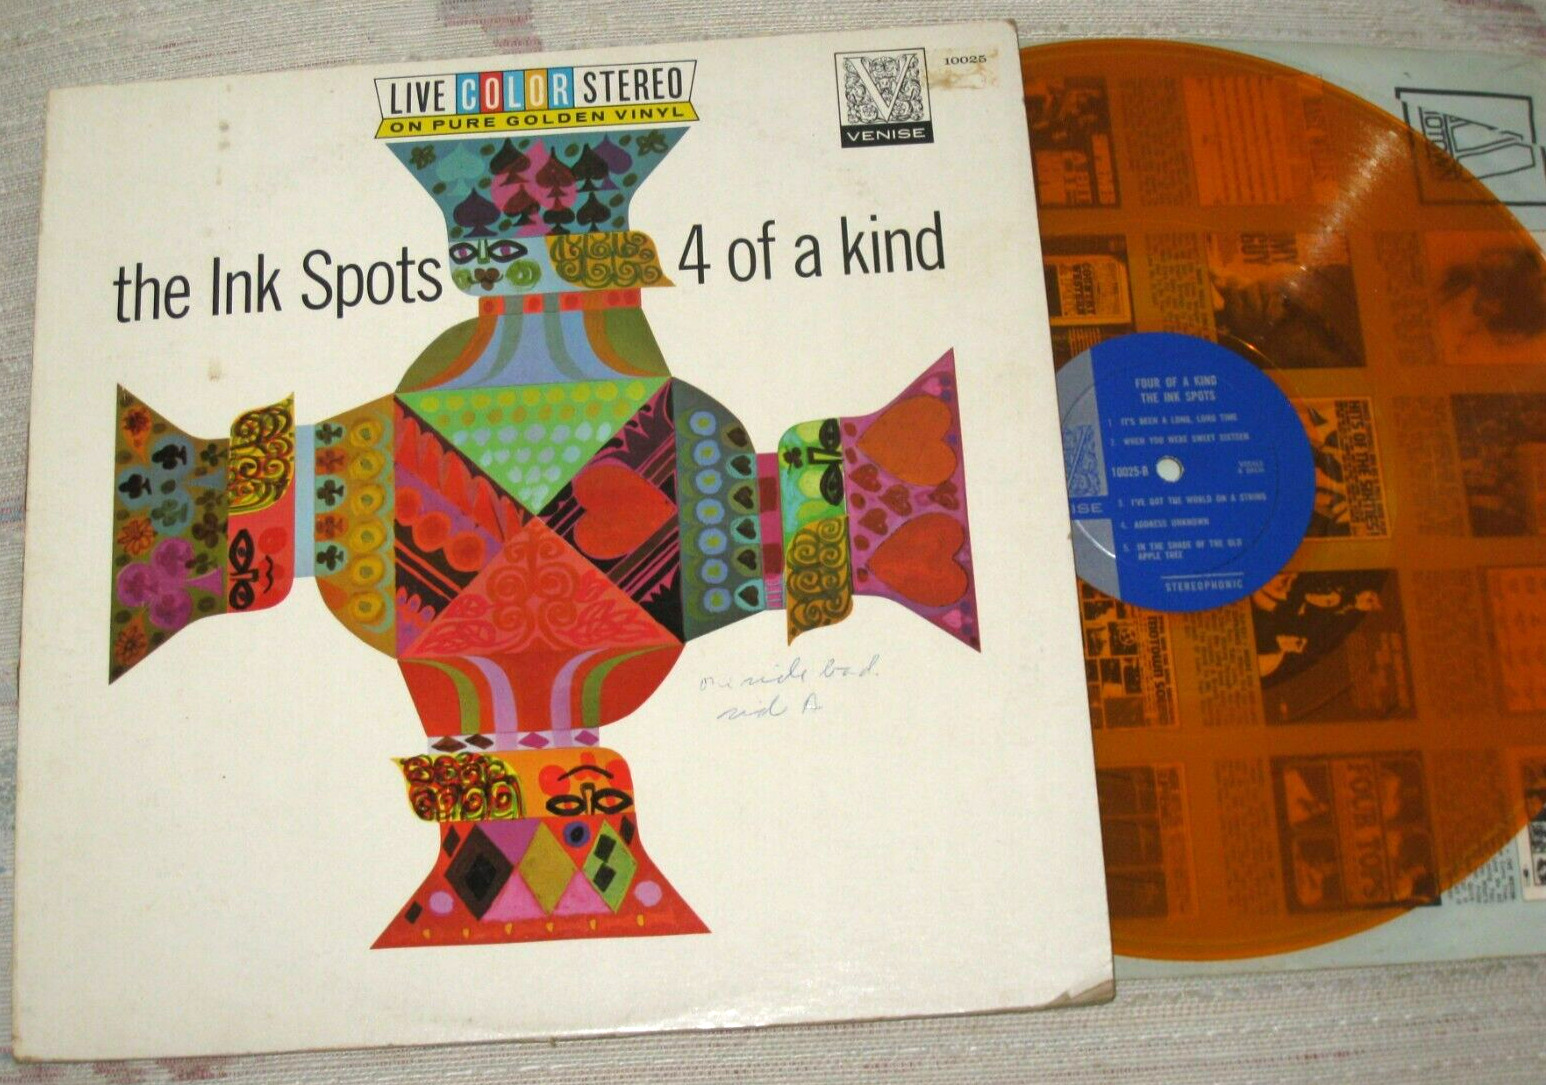 The Ink Spots 4 of a Kind Golden  - Yellow / Orange  Vinyl Record LP  1960